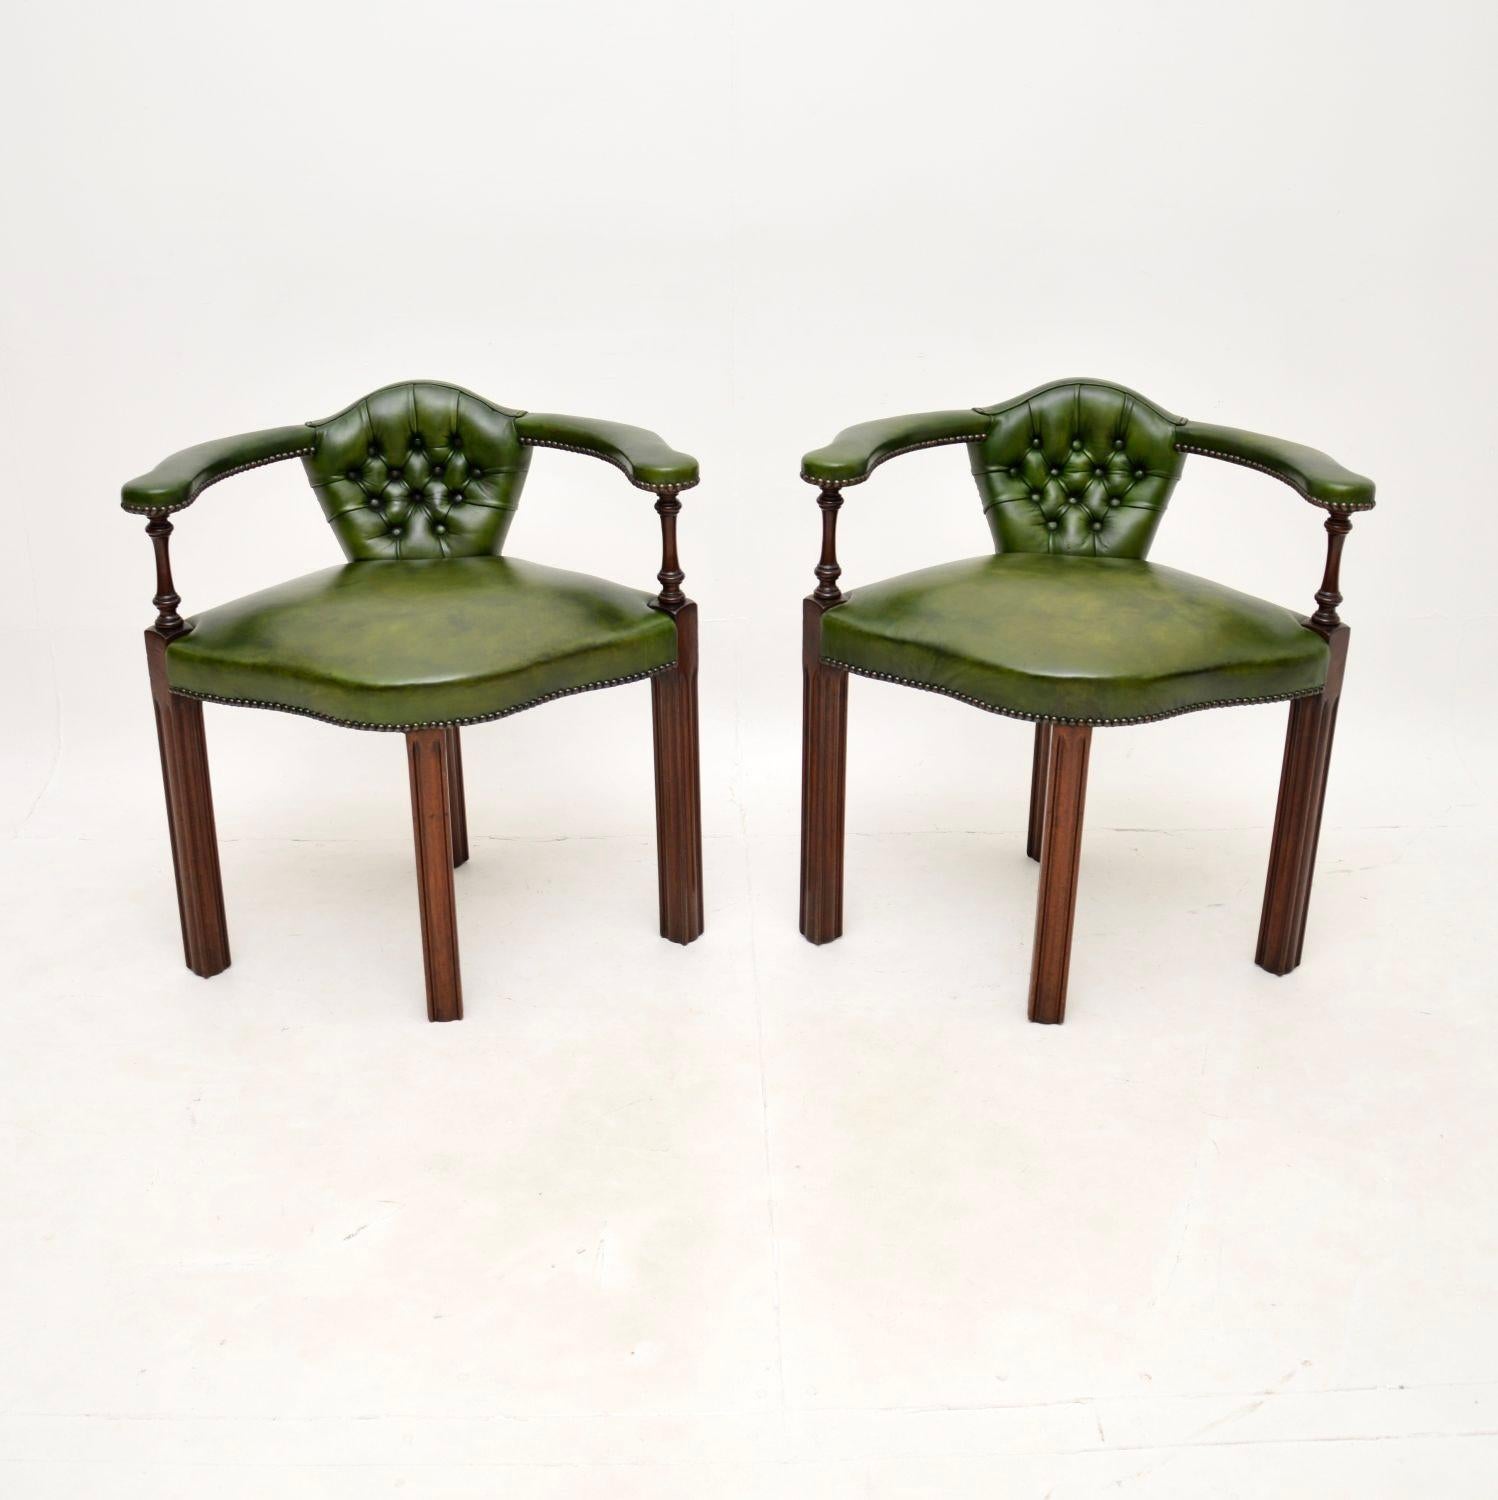 A superb pair of antique Georgian style armchairs. They were made in England, they date from around the 1950-60’s.

The quality is outstanding, they are beautifully designed and could be used as corner chairs or as occasional side chairs. They are